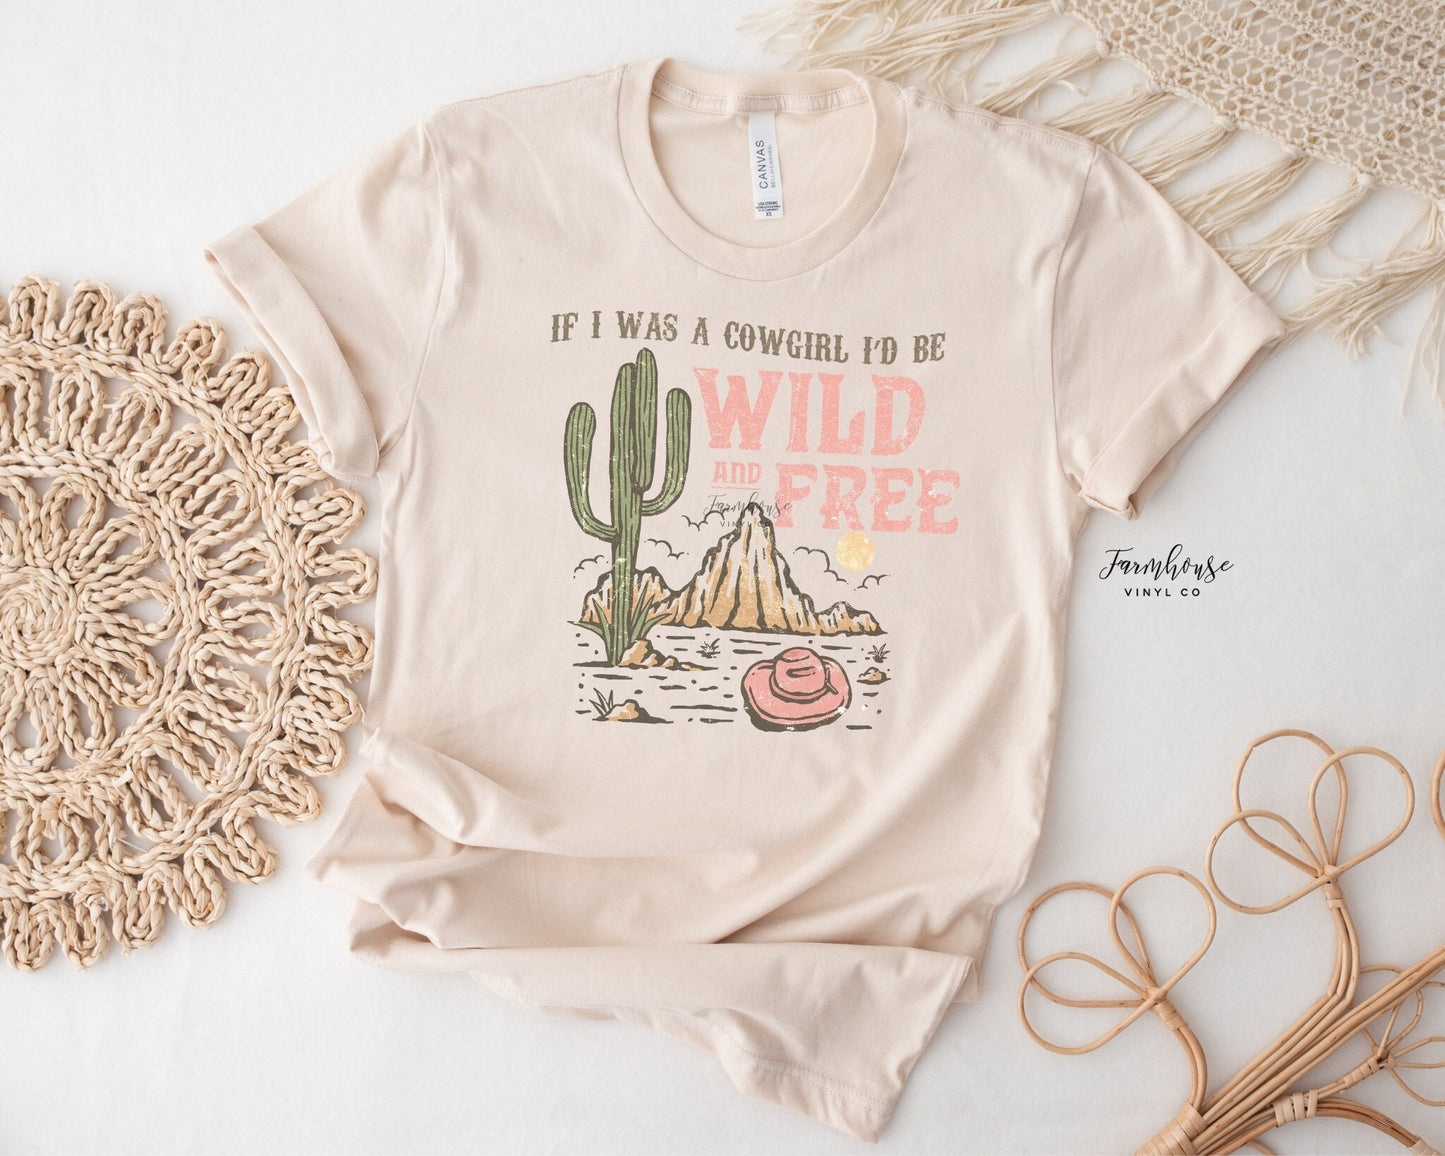 If I Was A Cowgirl I'd Be Wild & Free Shirt - Farmhouse Vinyl Co